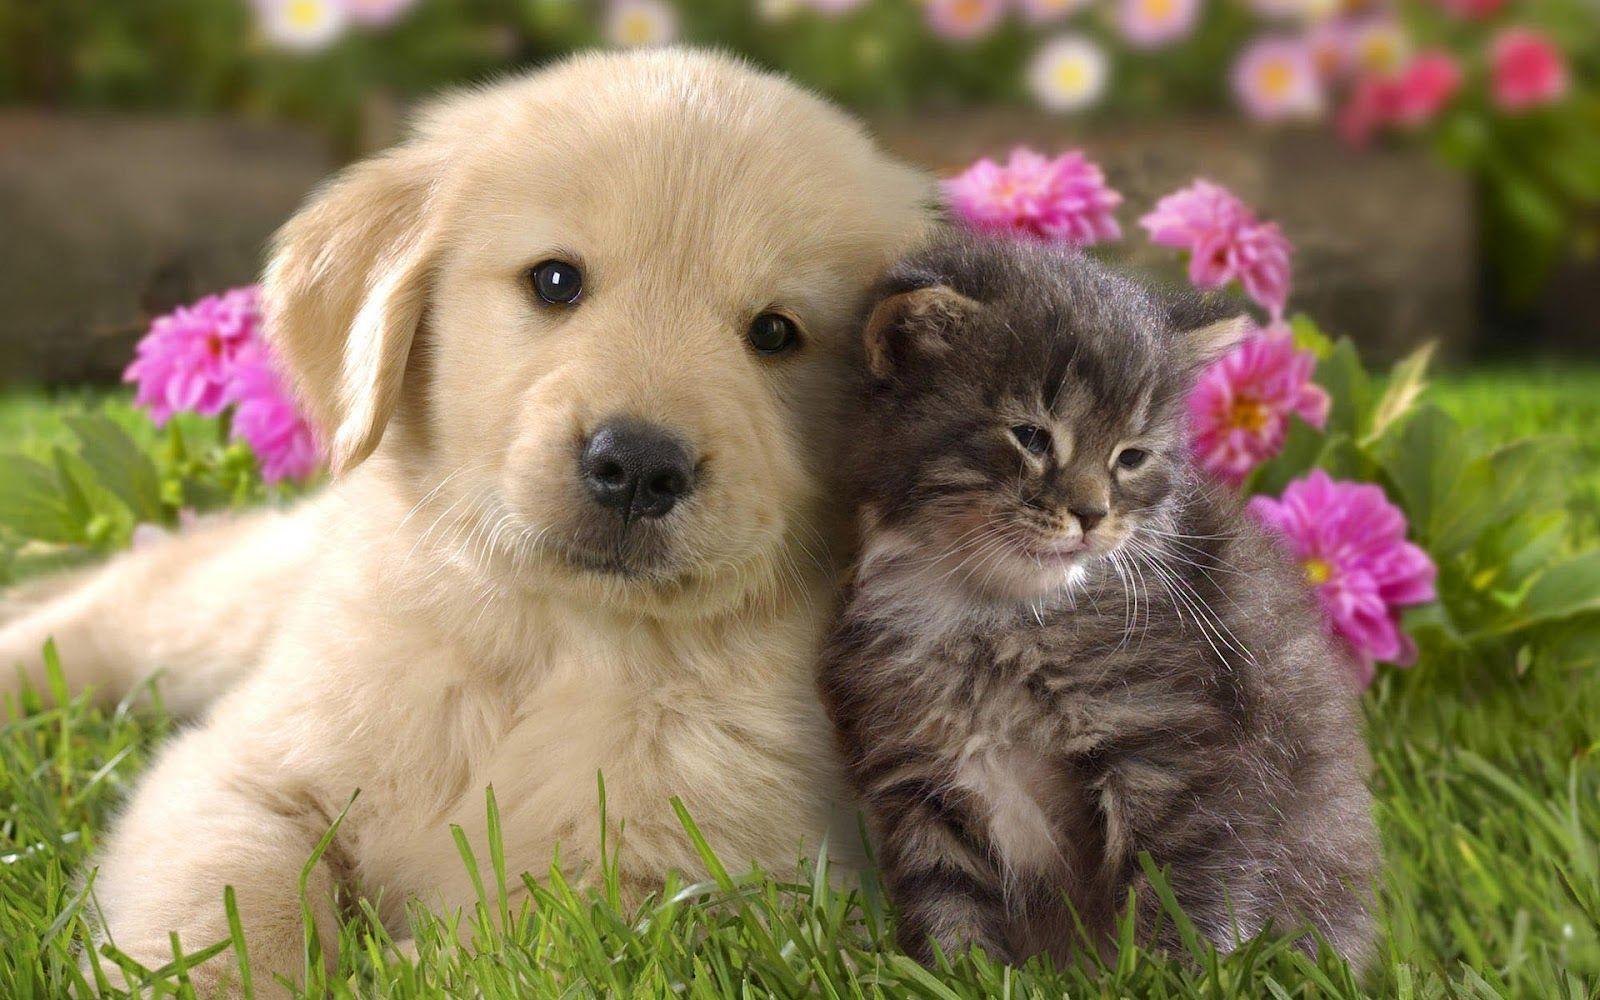 Cat And Dog Wallpaper 71 20795 High Definition Wallpaper